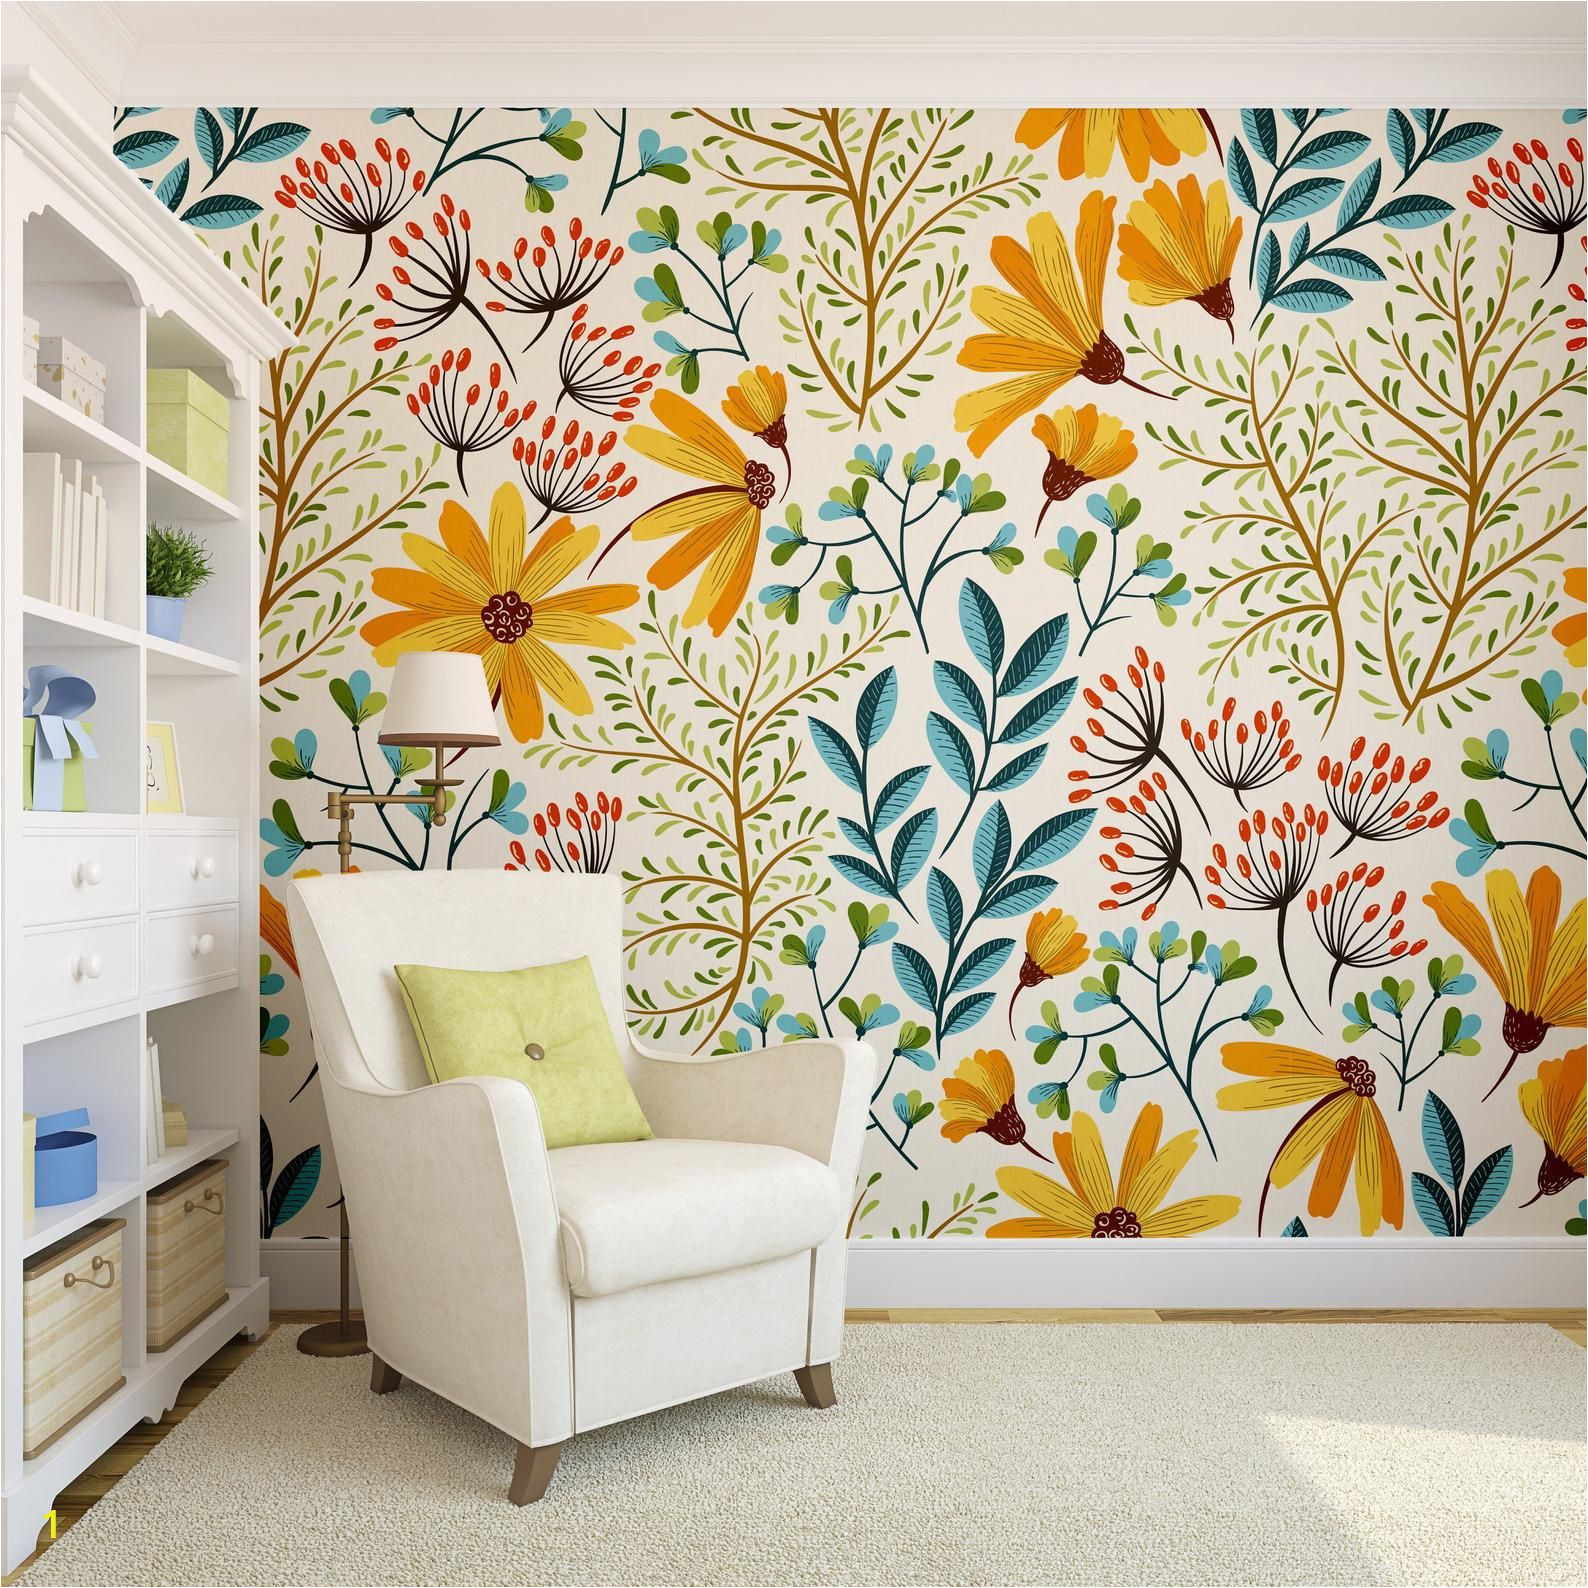 Removable Wall Murals Nature Removable Wallpaper Colorful Floral